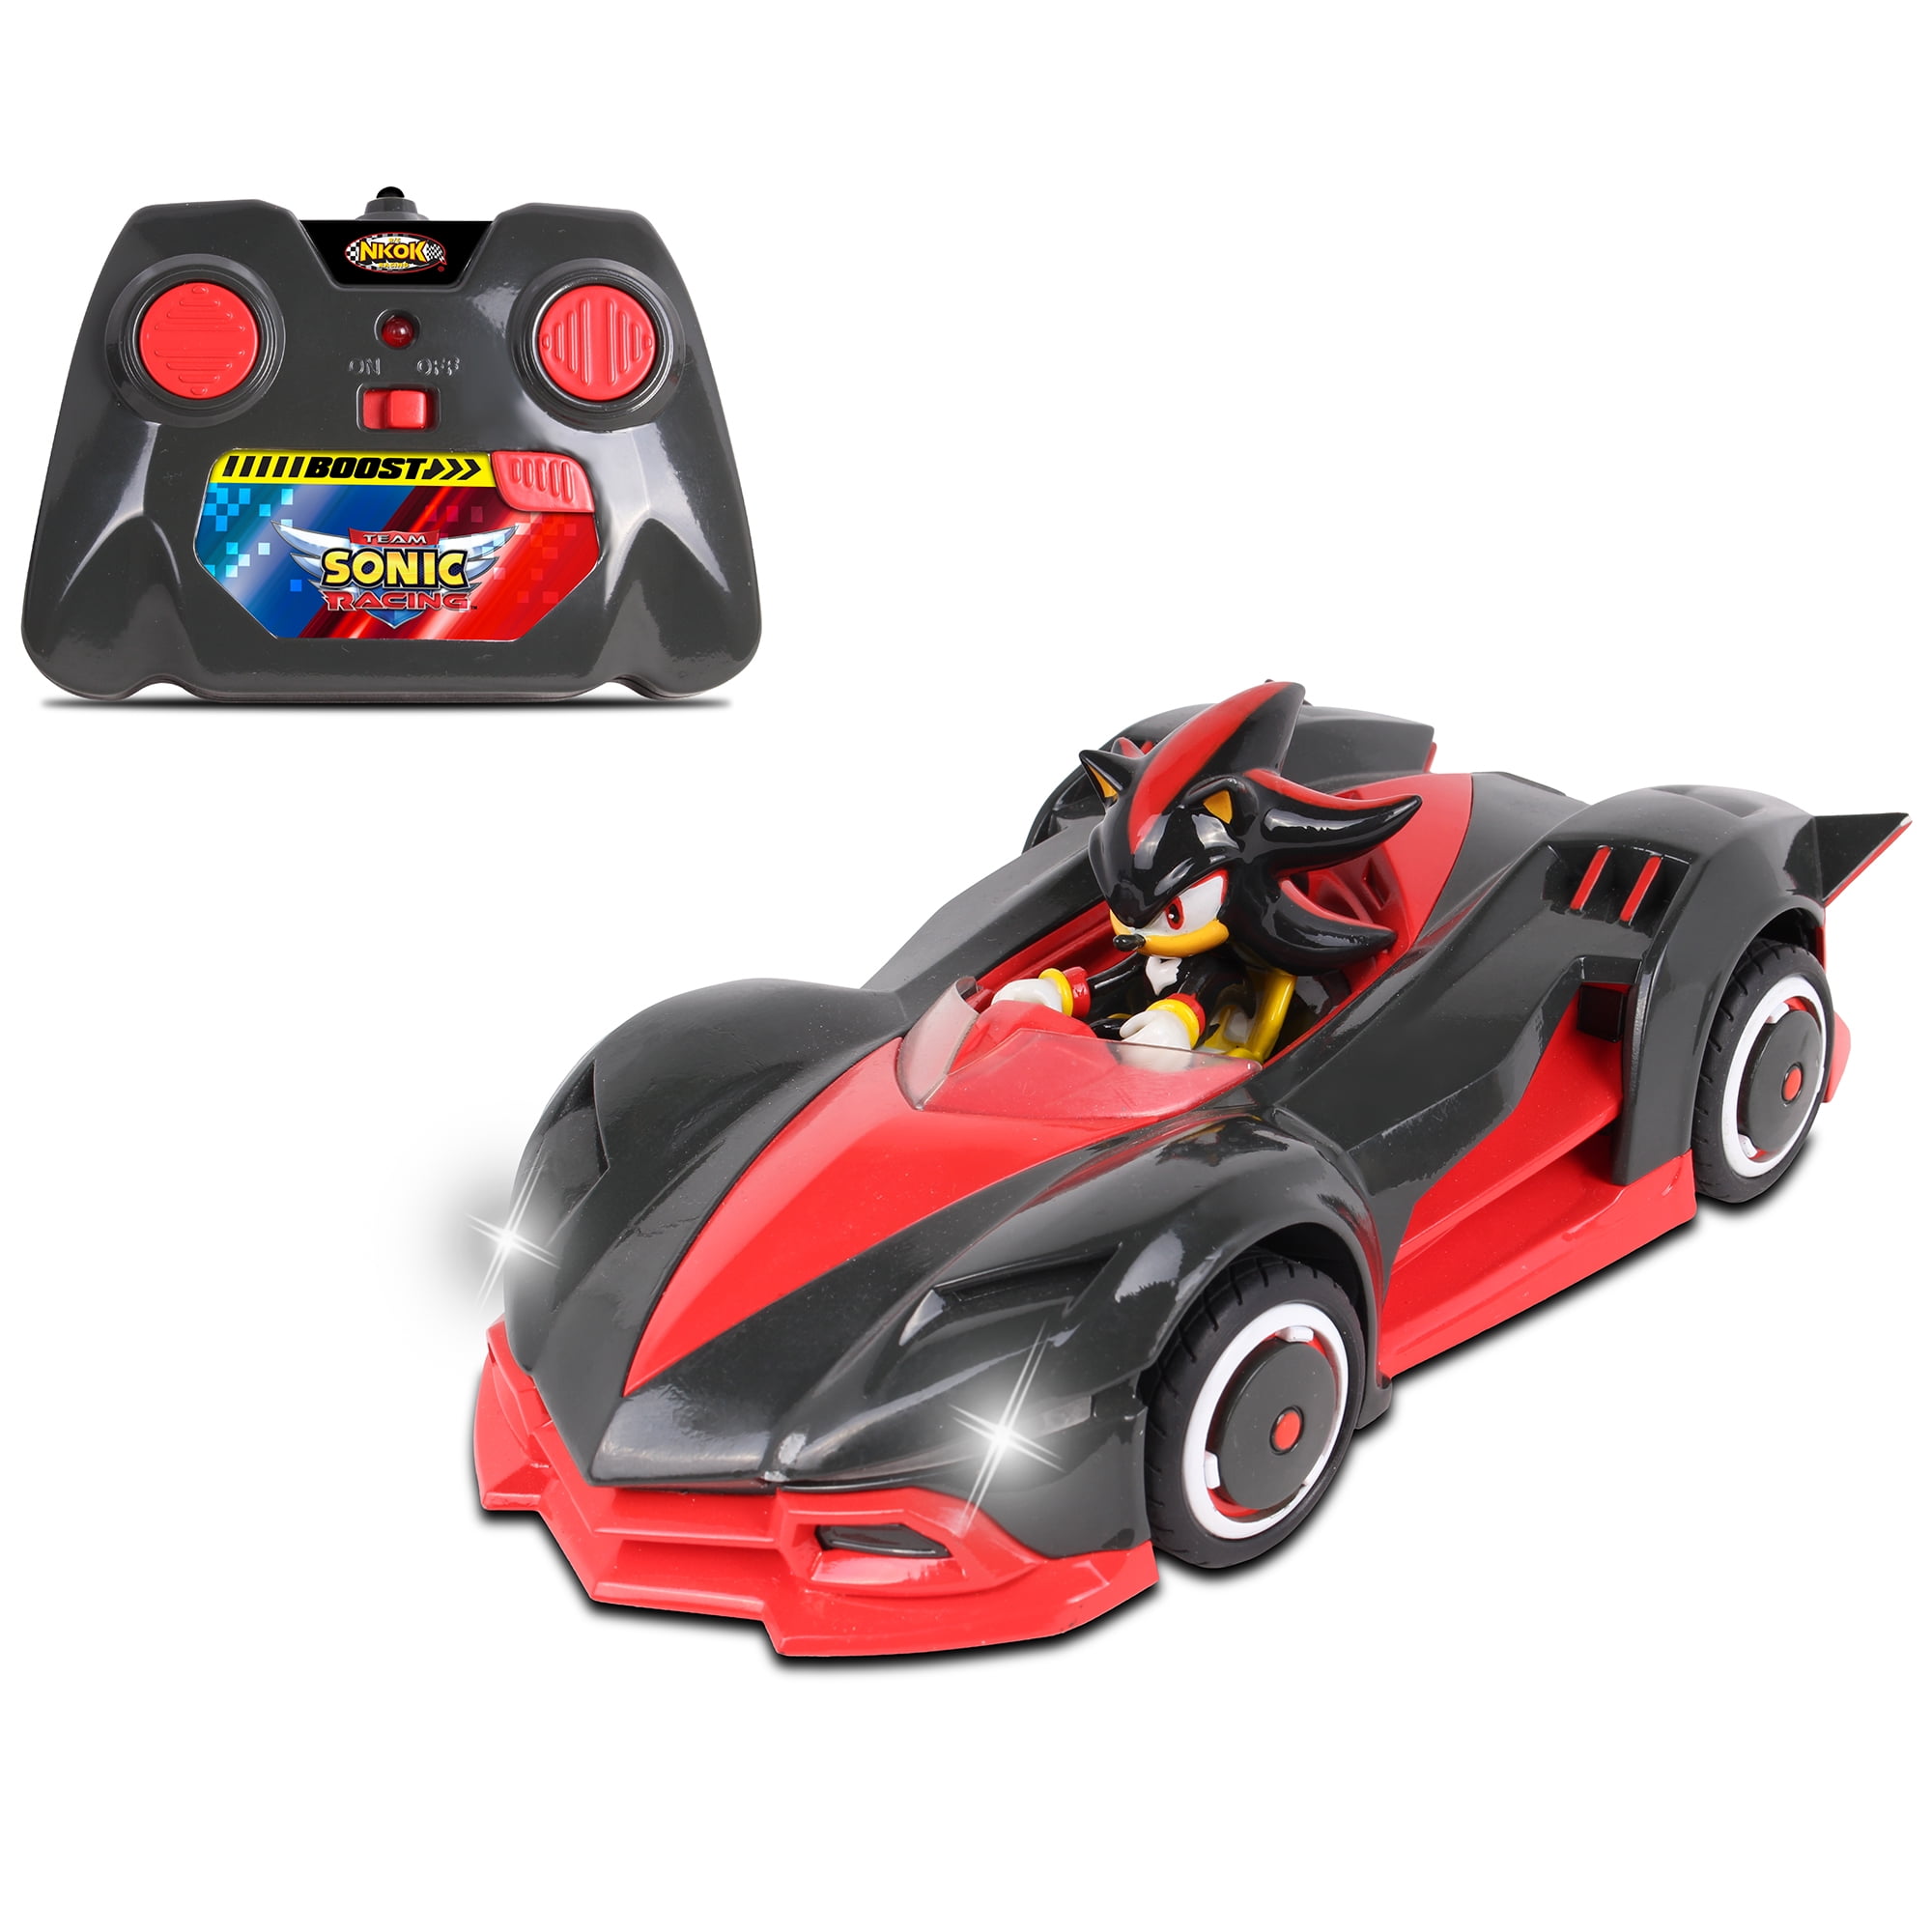 Sonic Racing 2.4Ghz Remote Controlled Car w/ Turbo BoostSonic The Hedgehog 